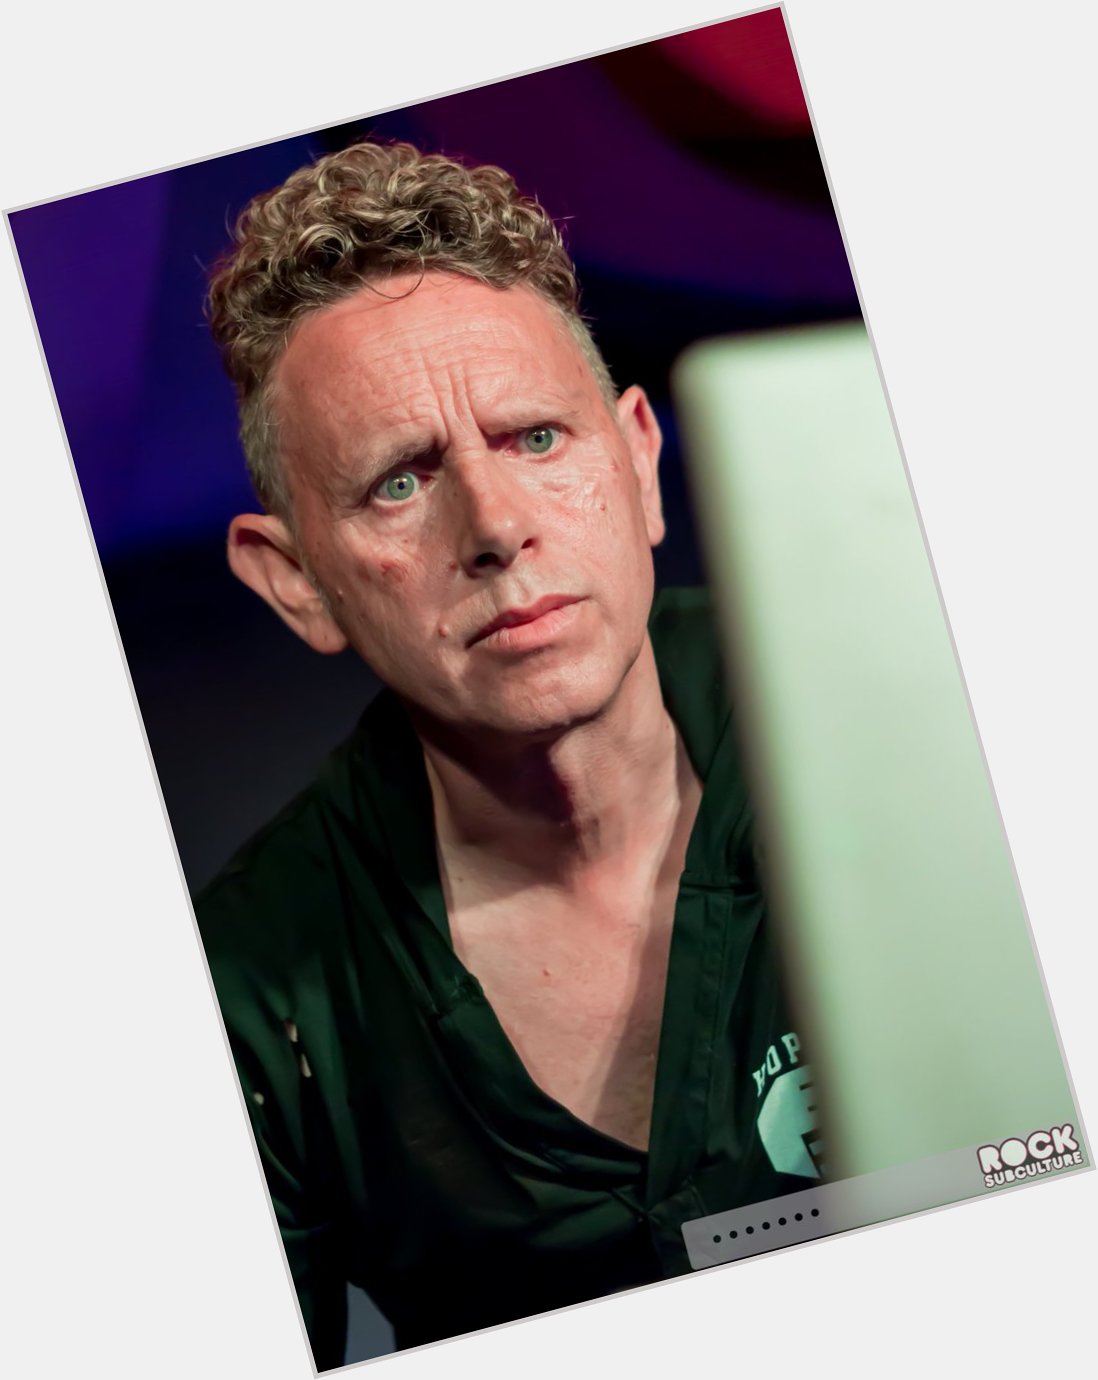 Happy birthday Martin Gore original member of one of the worlds greatest bands. Depeche Mode. Enjoy your day. 